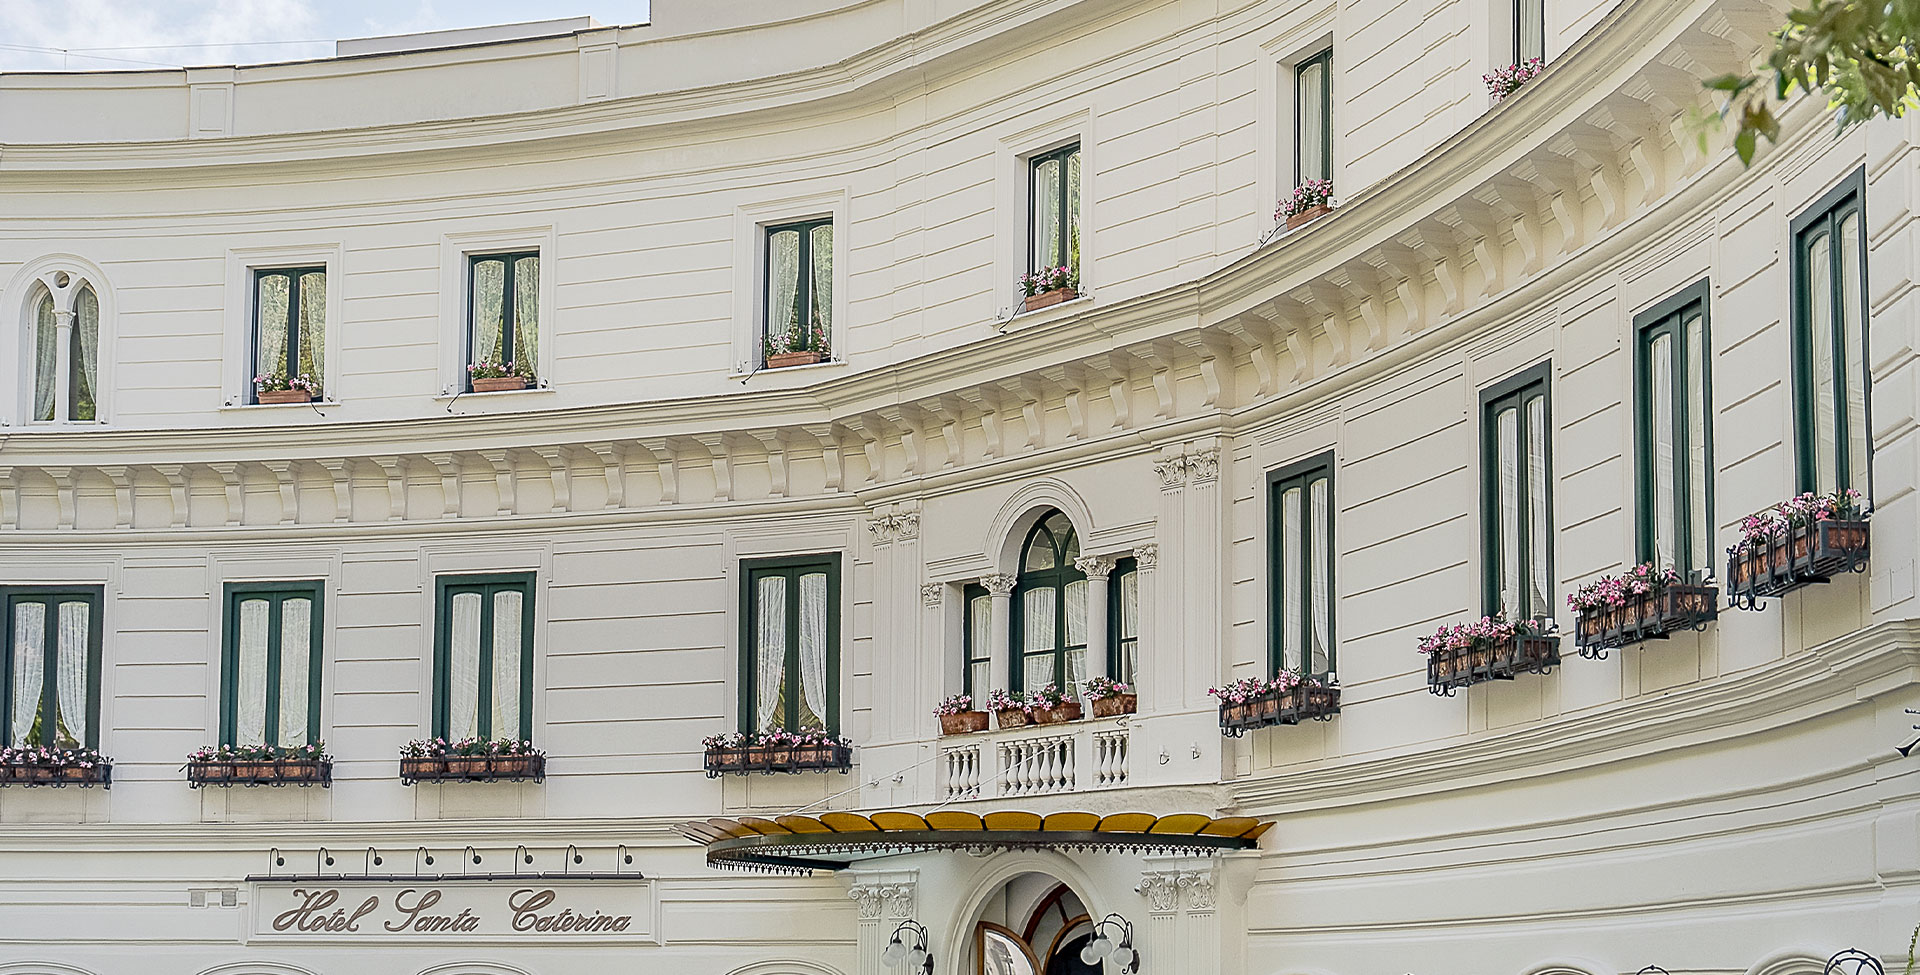 Hotel Santa Caterina is a timeless haven of elegance on Italy’s Amalfi Coast